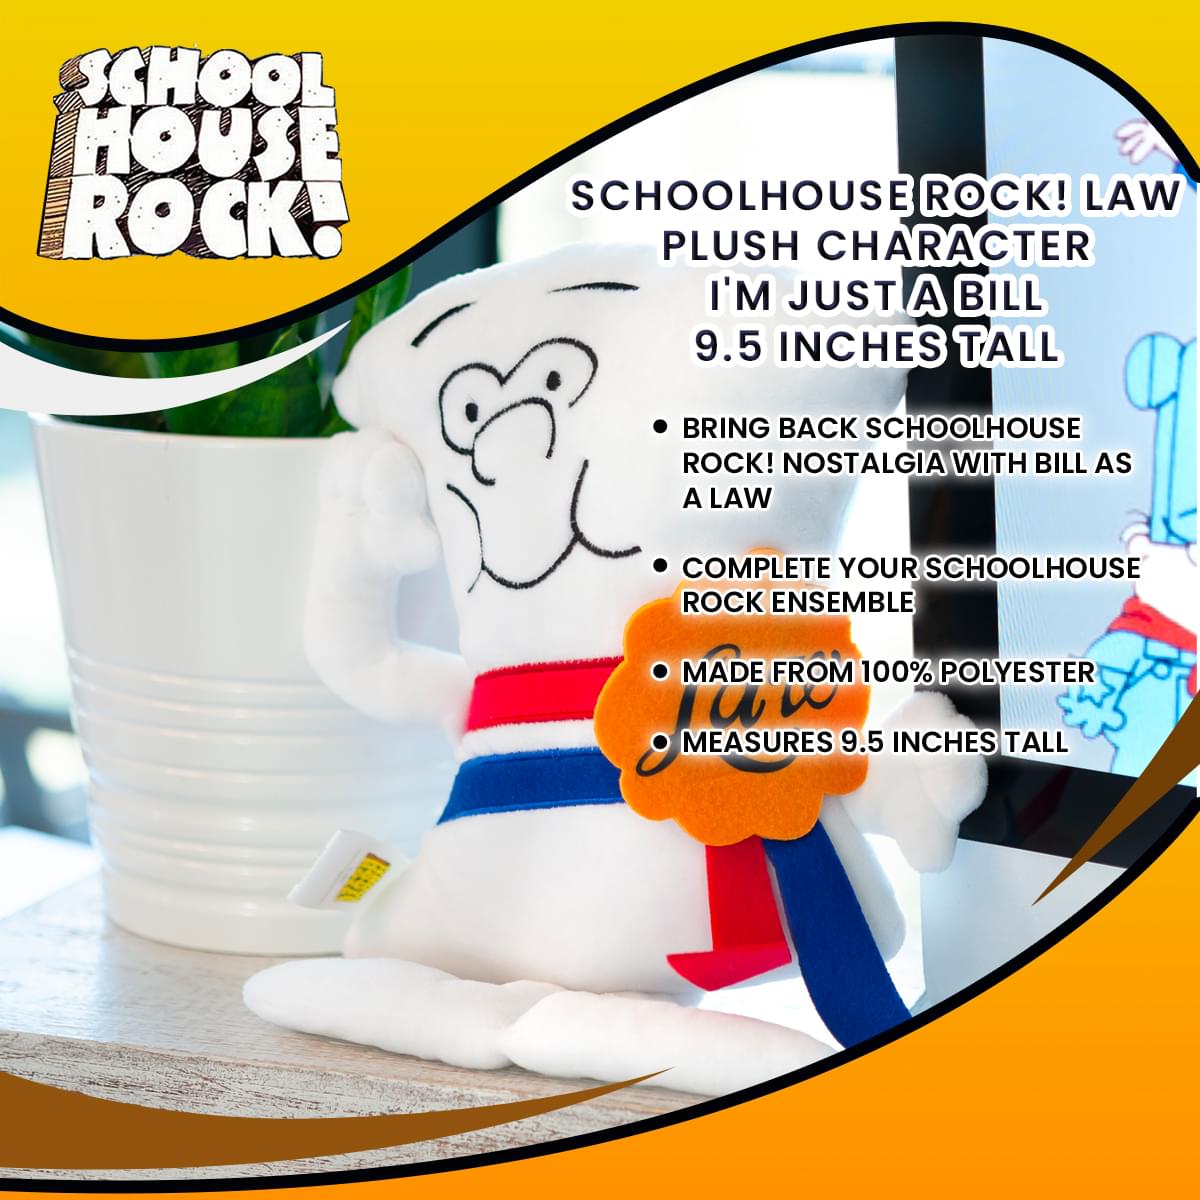 Schoolhouse Rock! Law Plush Character | I'm Just A Bill | 9.5 Inches Tall